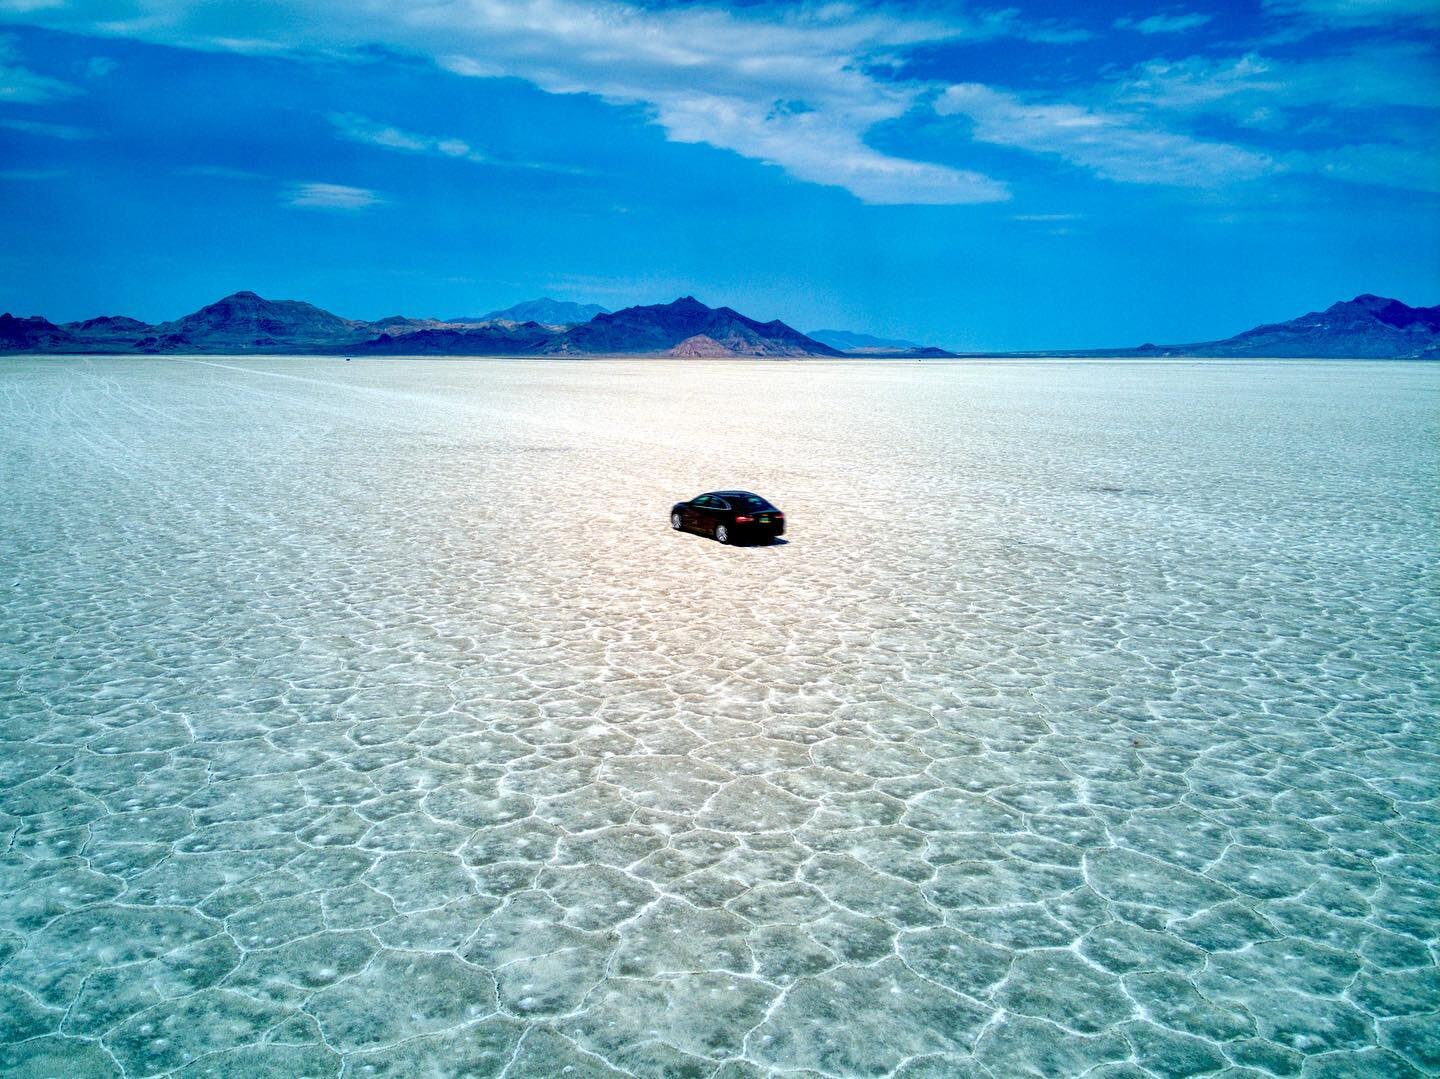 A 12-by-5 mile stretch occupying 300,000 acres of Utah&rsquo;s pristine west desert, the&nbsp;Bonneville Salt Flats&nbsp;is like no other place on earth. A salt crust ranging from a few inches to 5 feet thick forms a perfectly flat, uniform, blinding